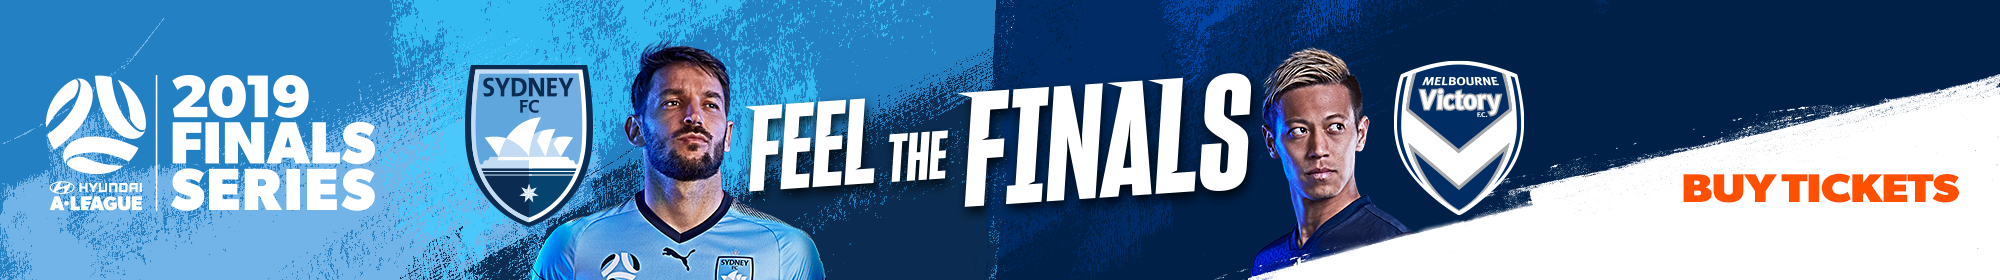 Feel The Finals - Sydney FC v Melbourne Victory Semi Final Thin Banner